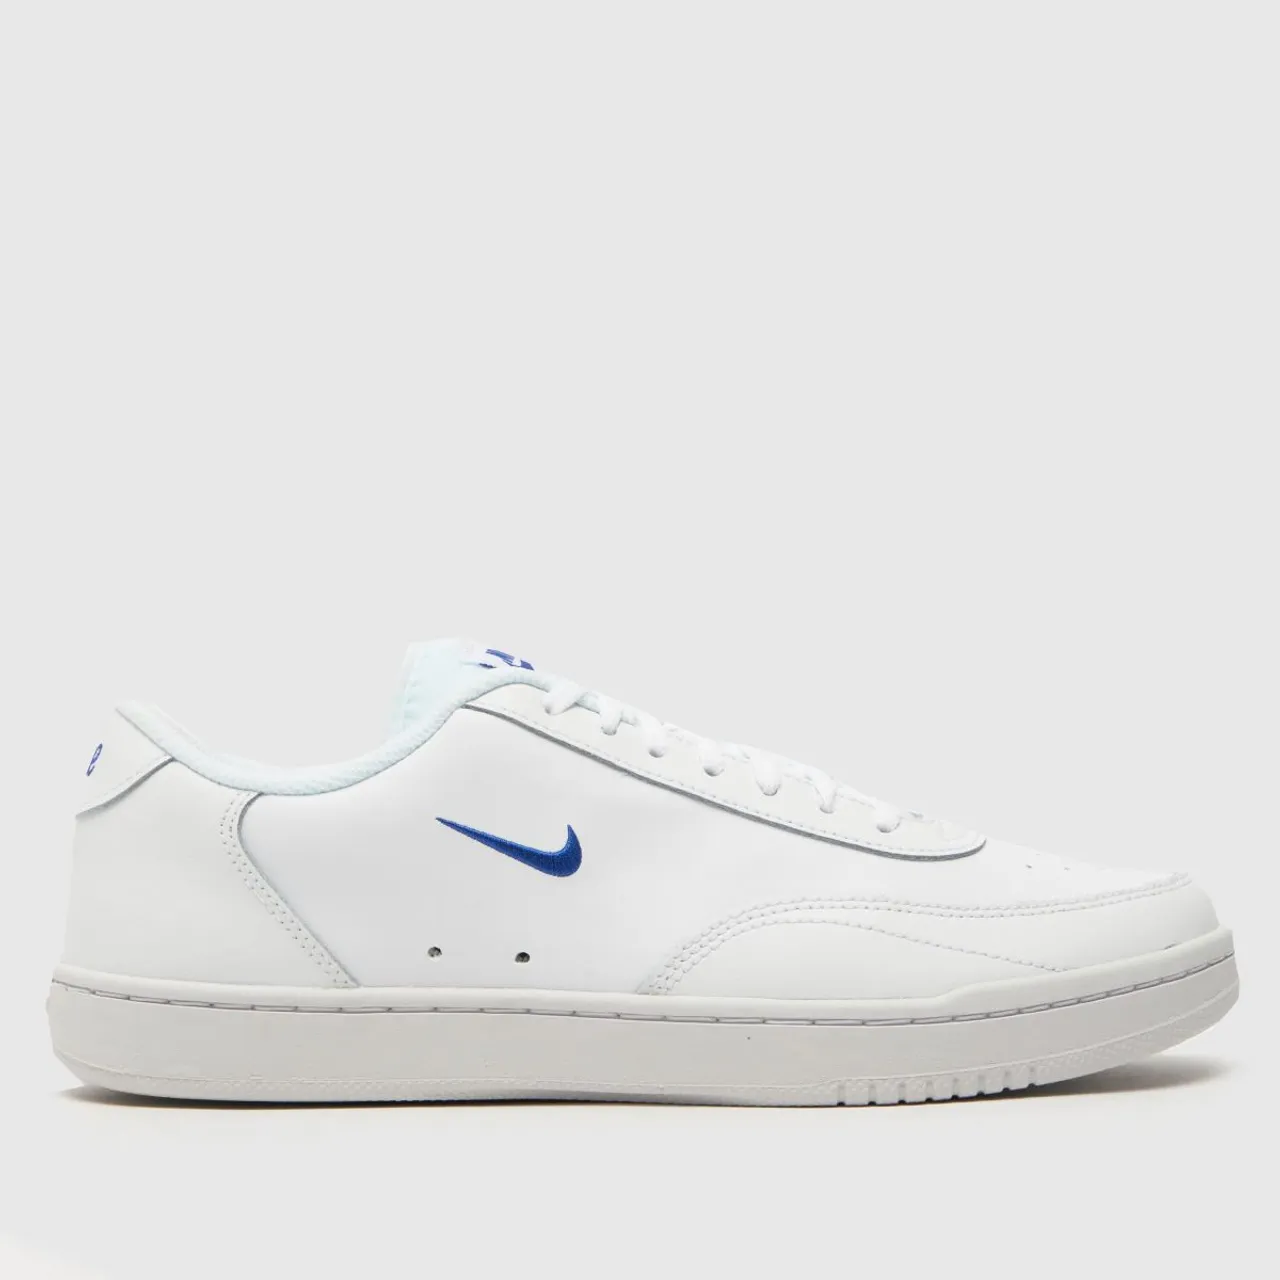 Nike Court Vintage Trainers In White & Blue